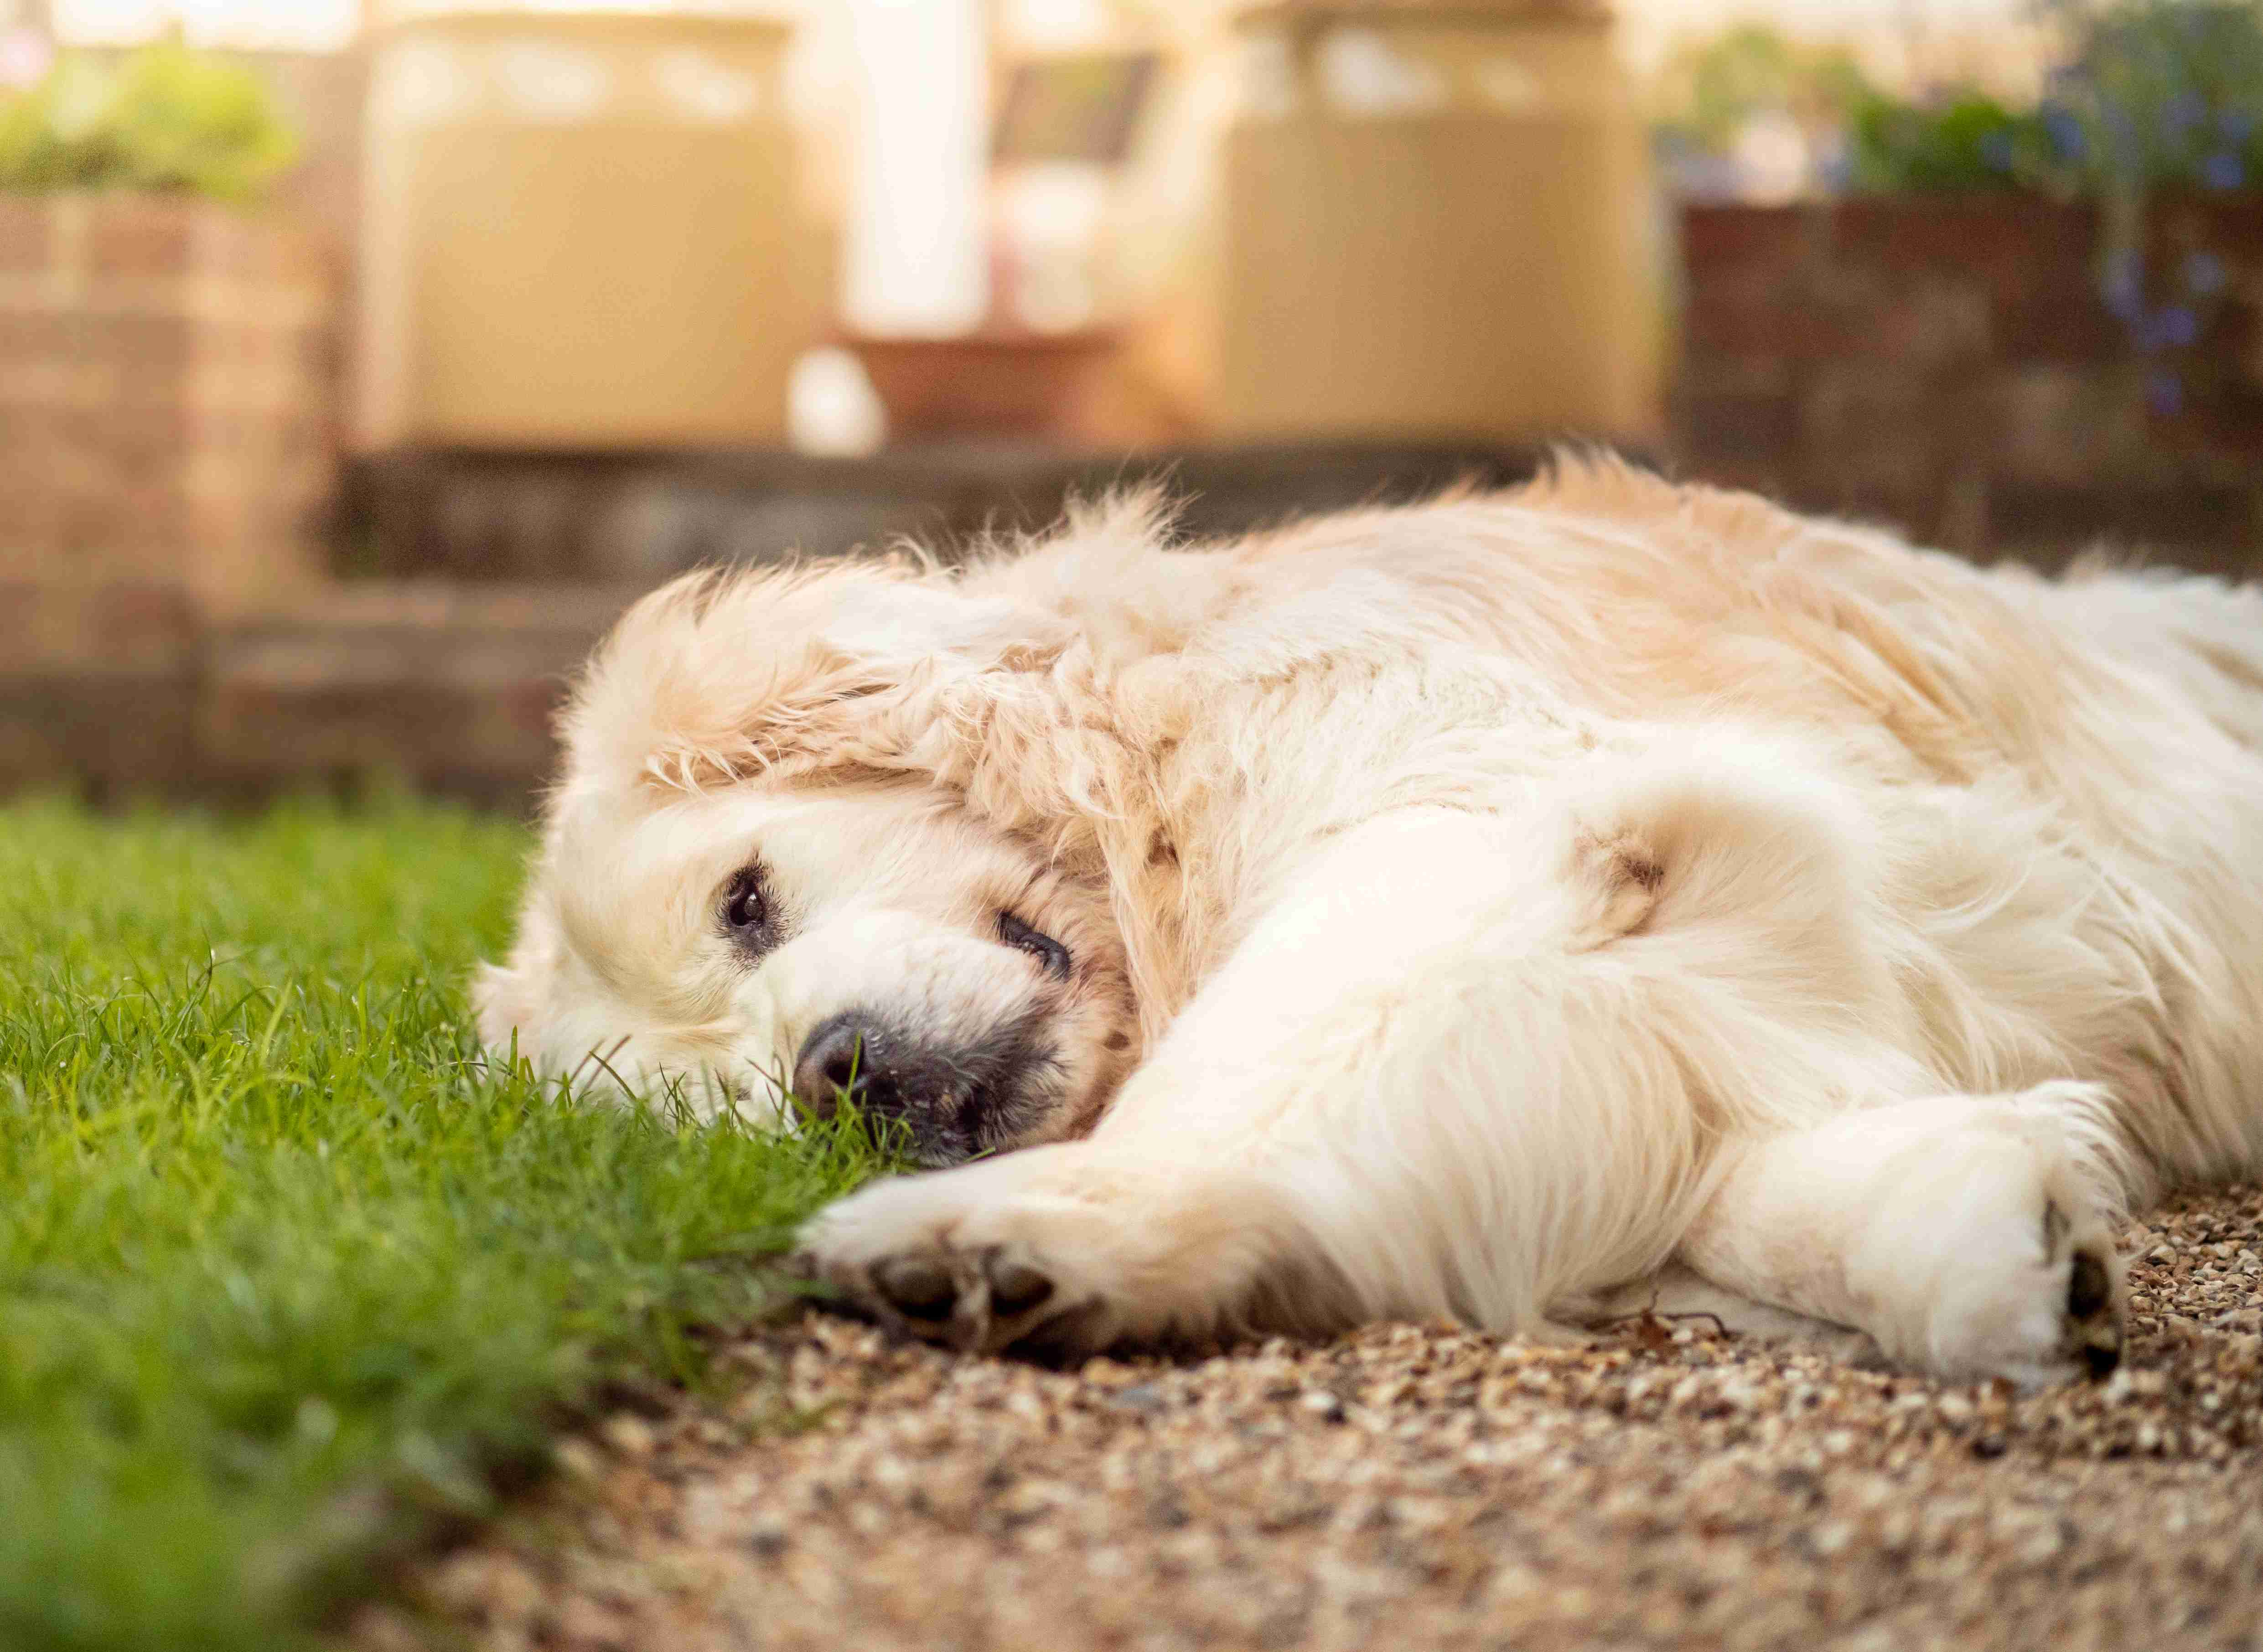 How can I prevent my golden retriever from developing eye infections?